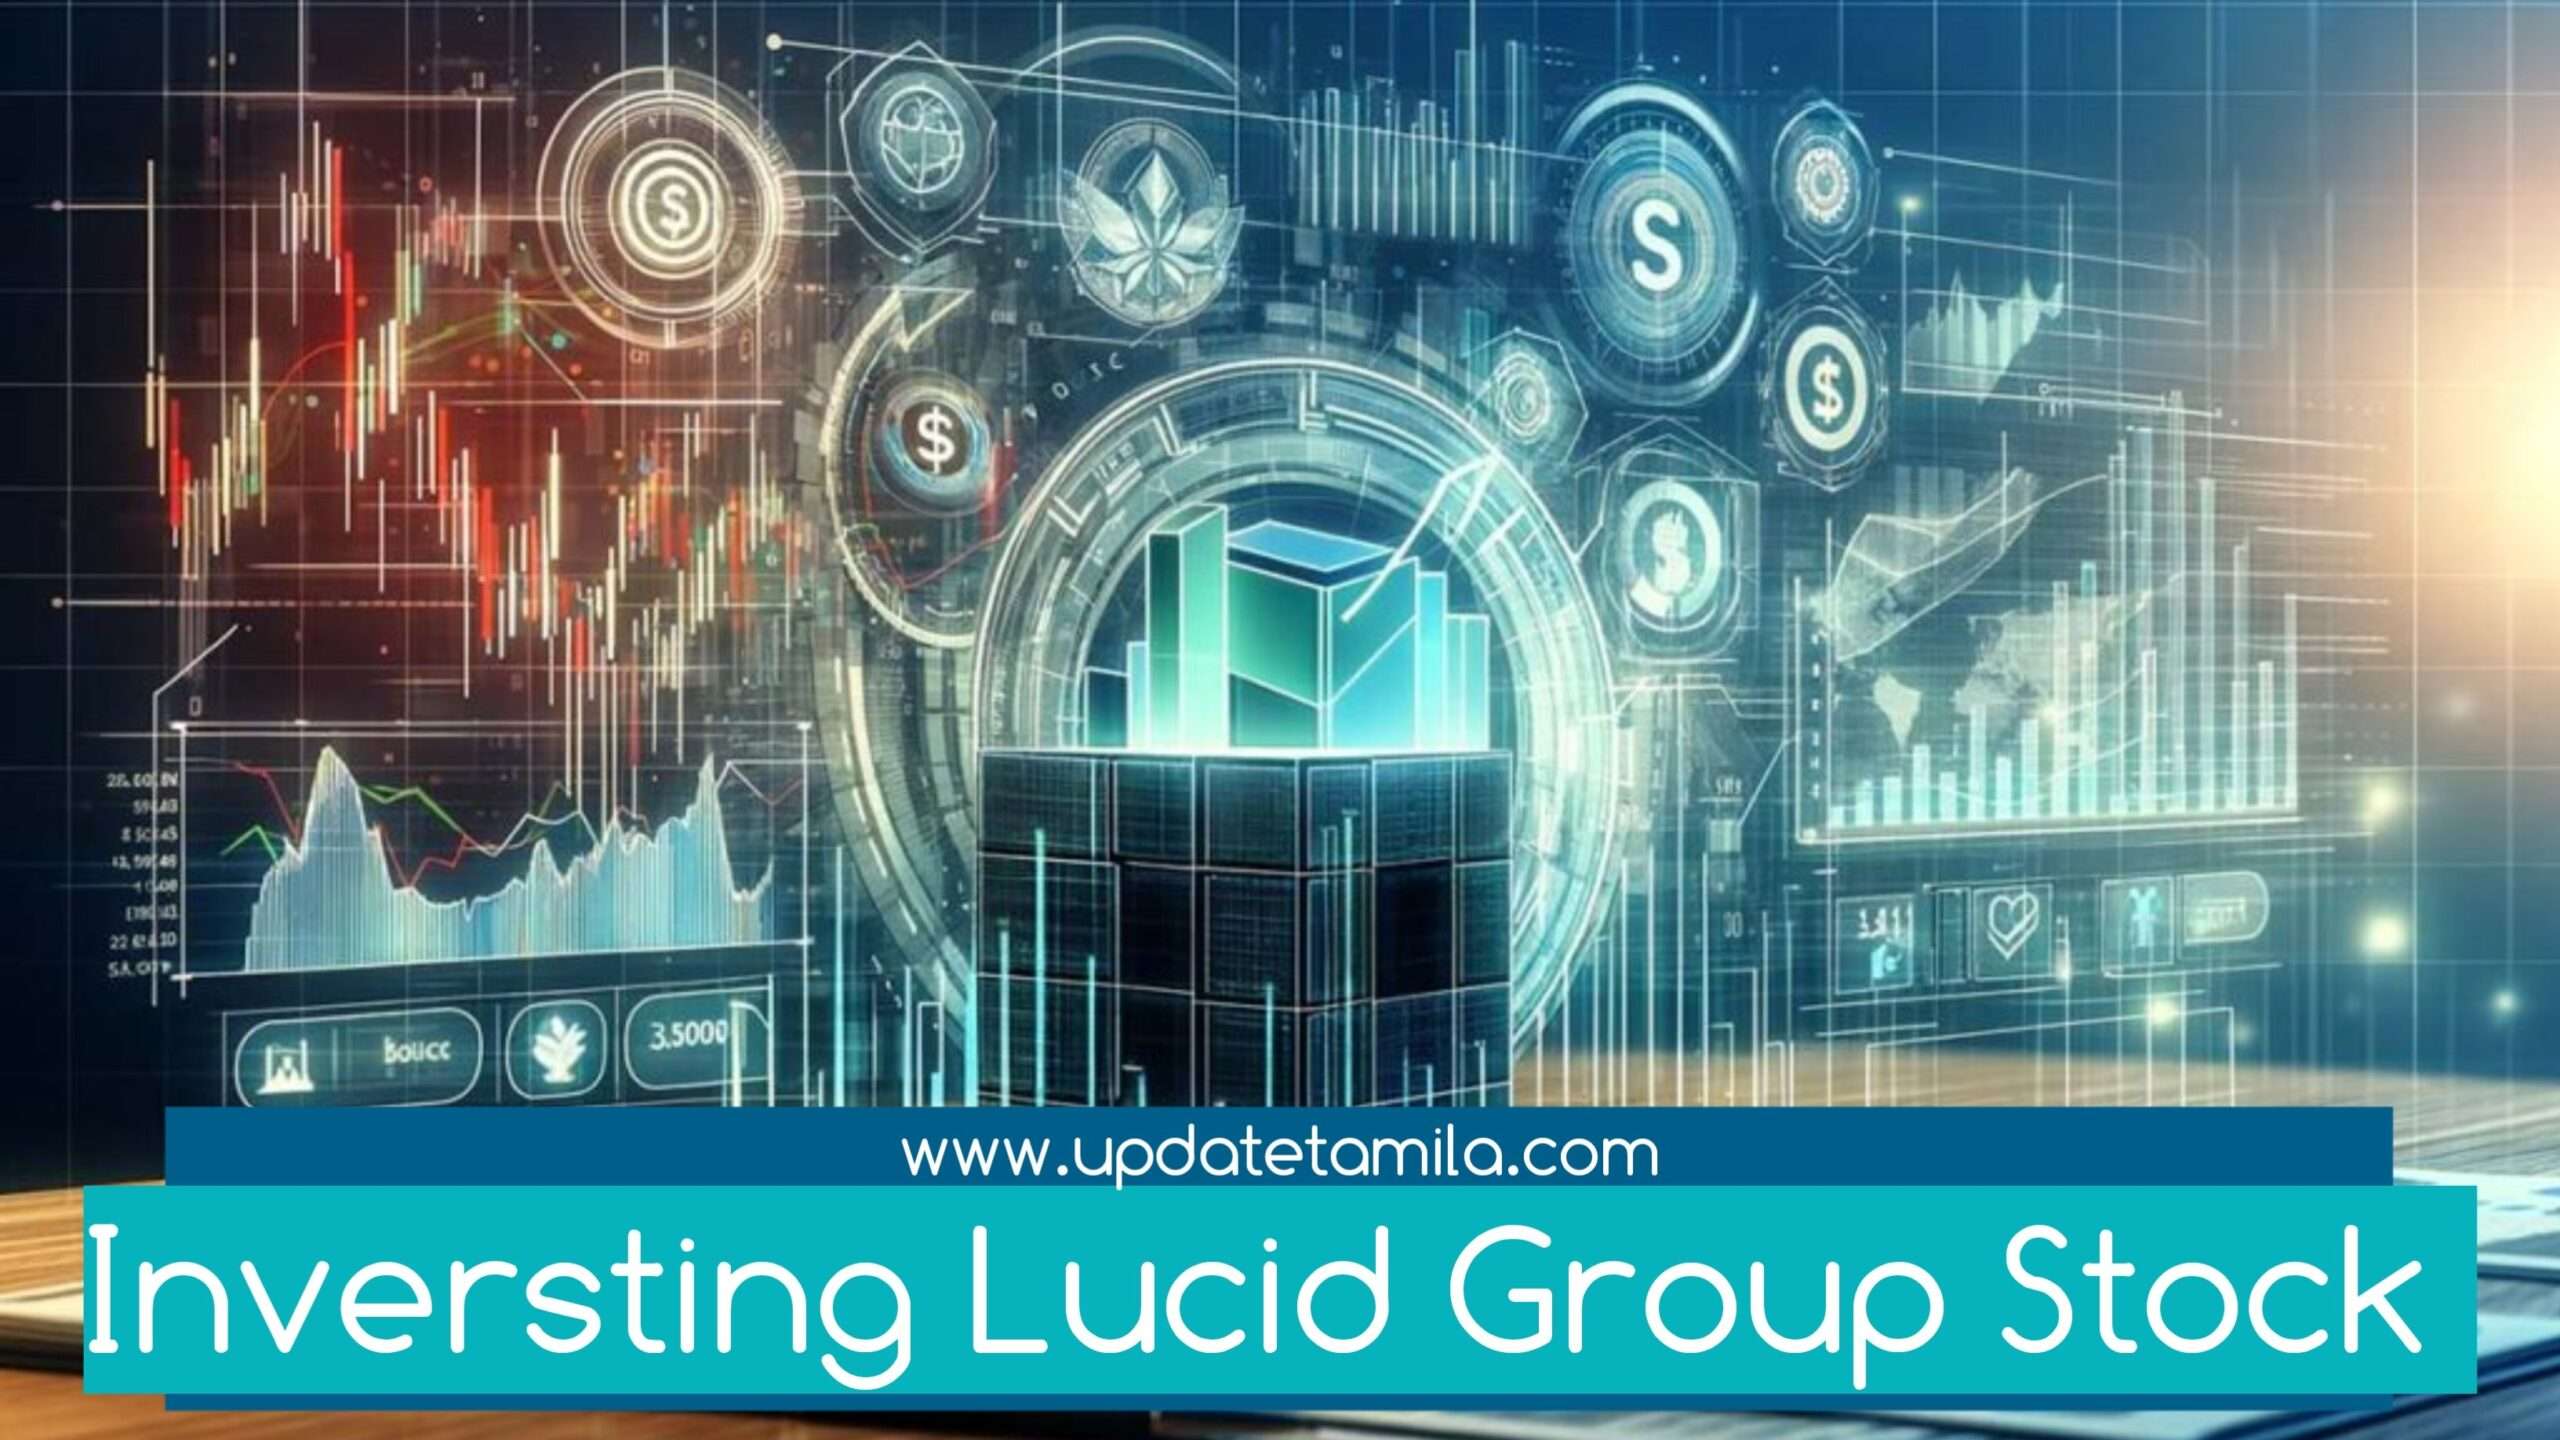 What are the key risks associated with investing in Fintechzoom LCID Stock?